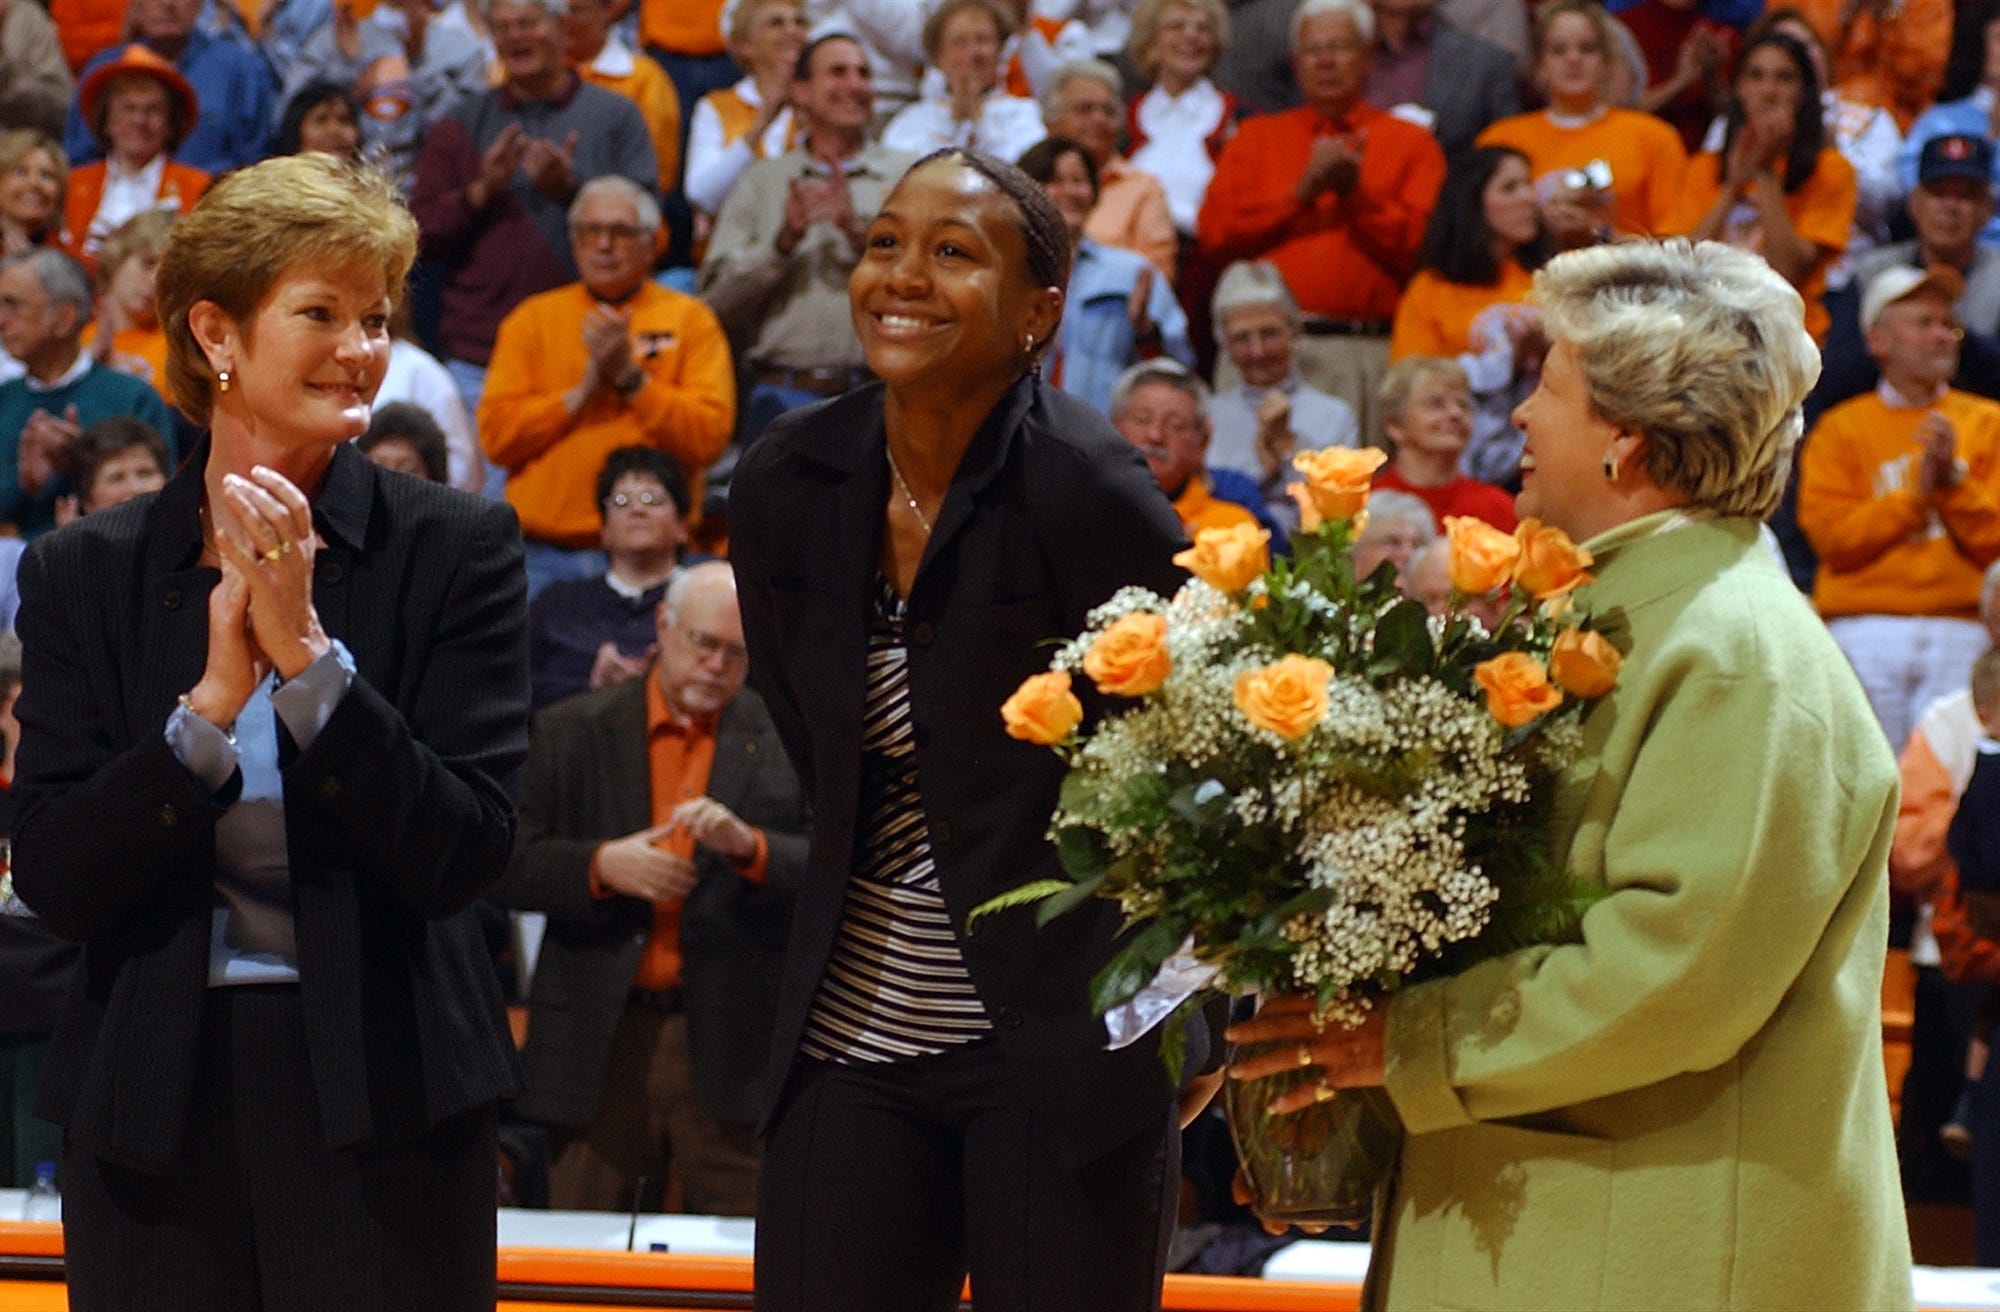 Women's Basketball Hall of Fame induction moved to 2021